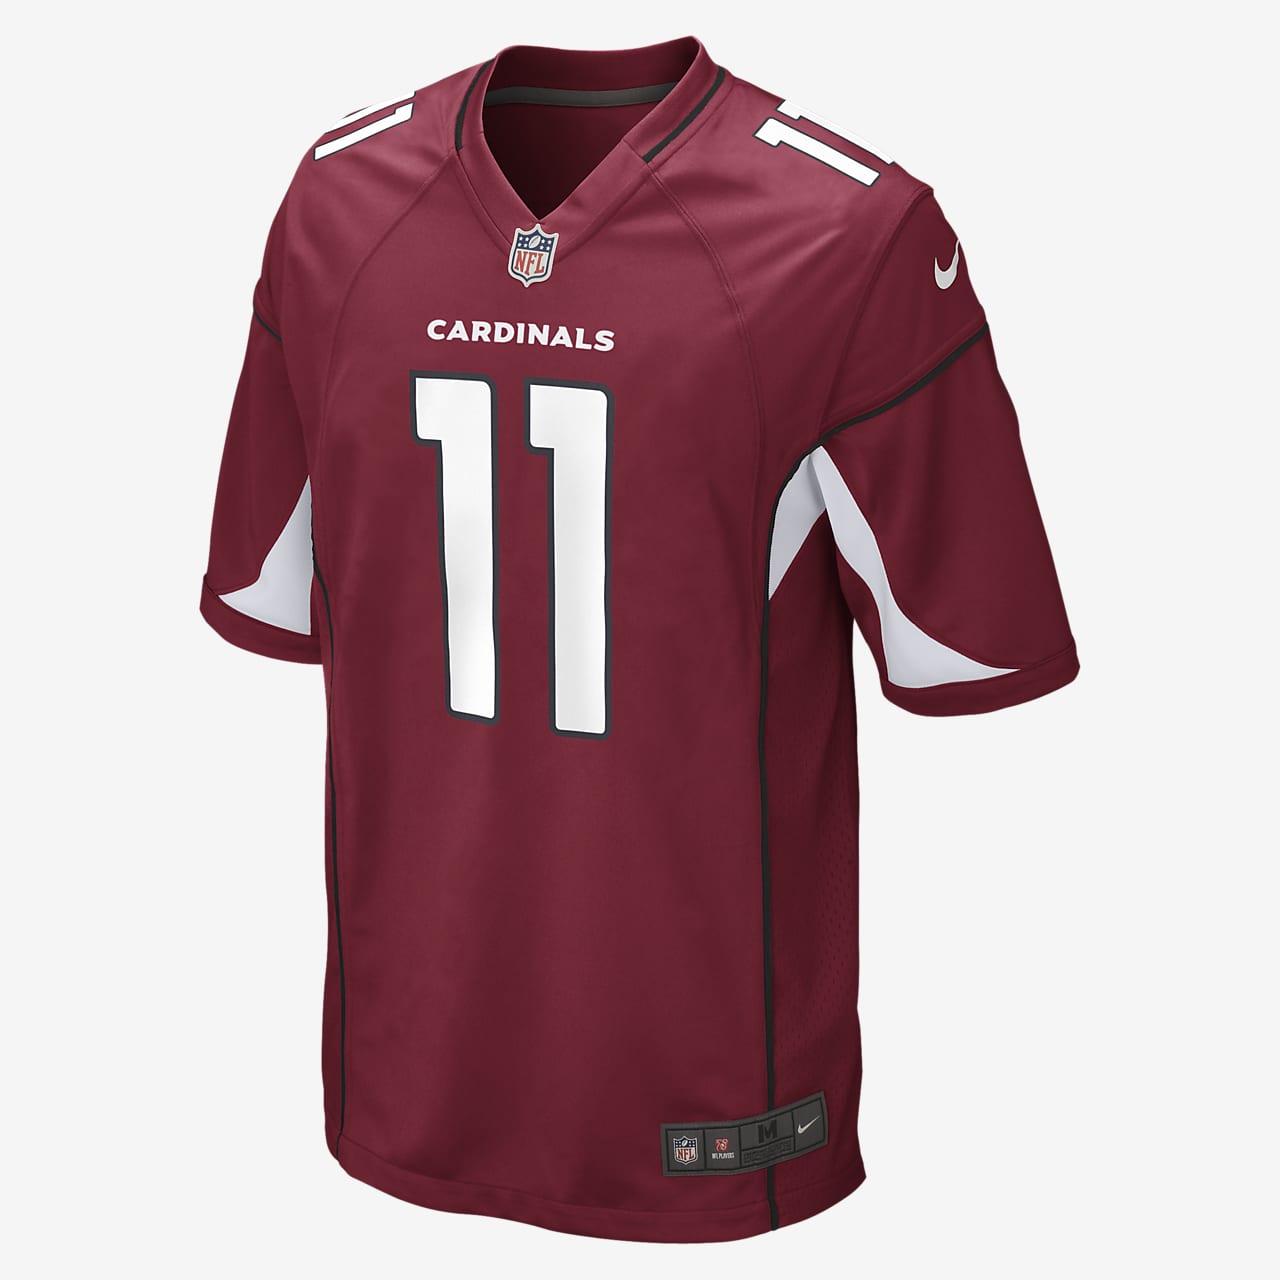 larry fitzgerald jersey number